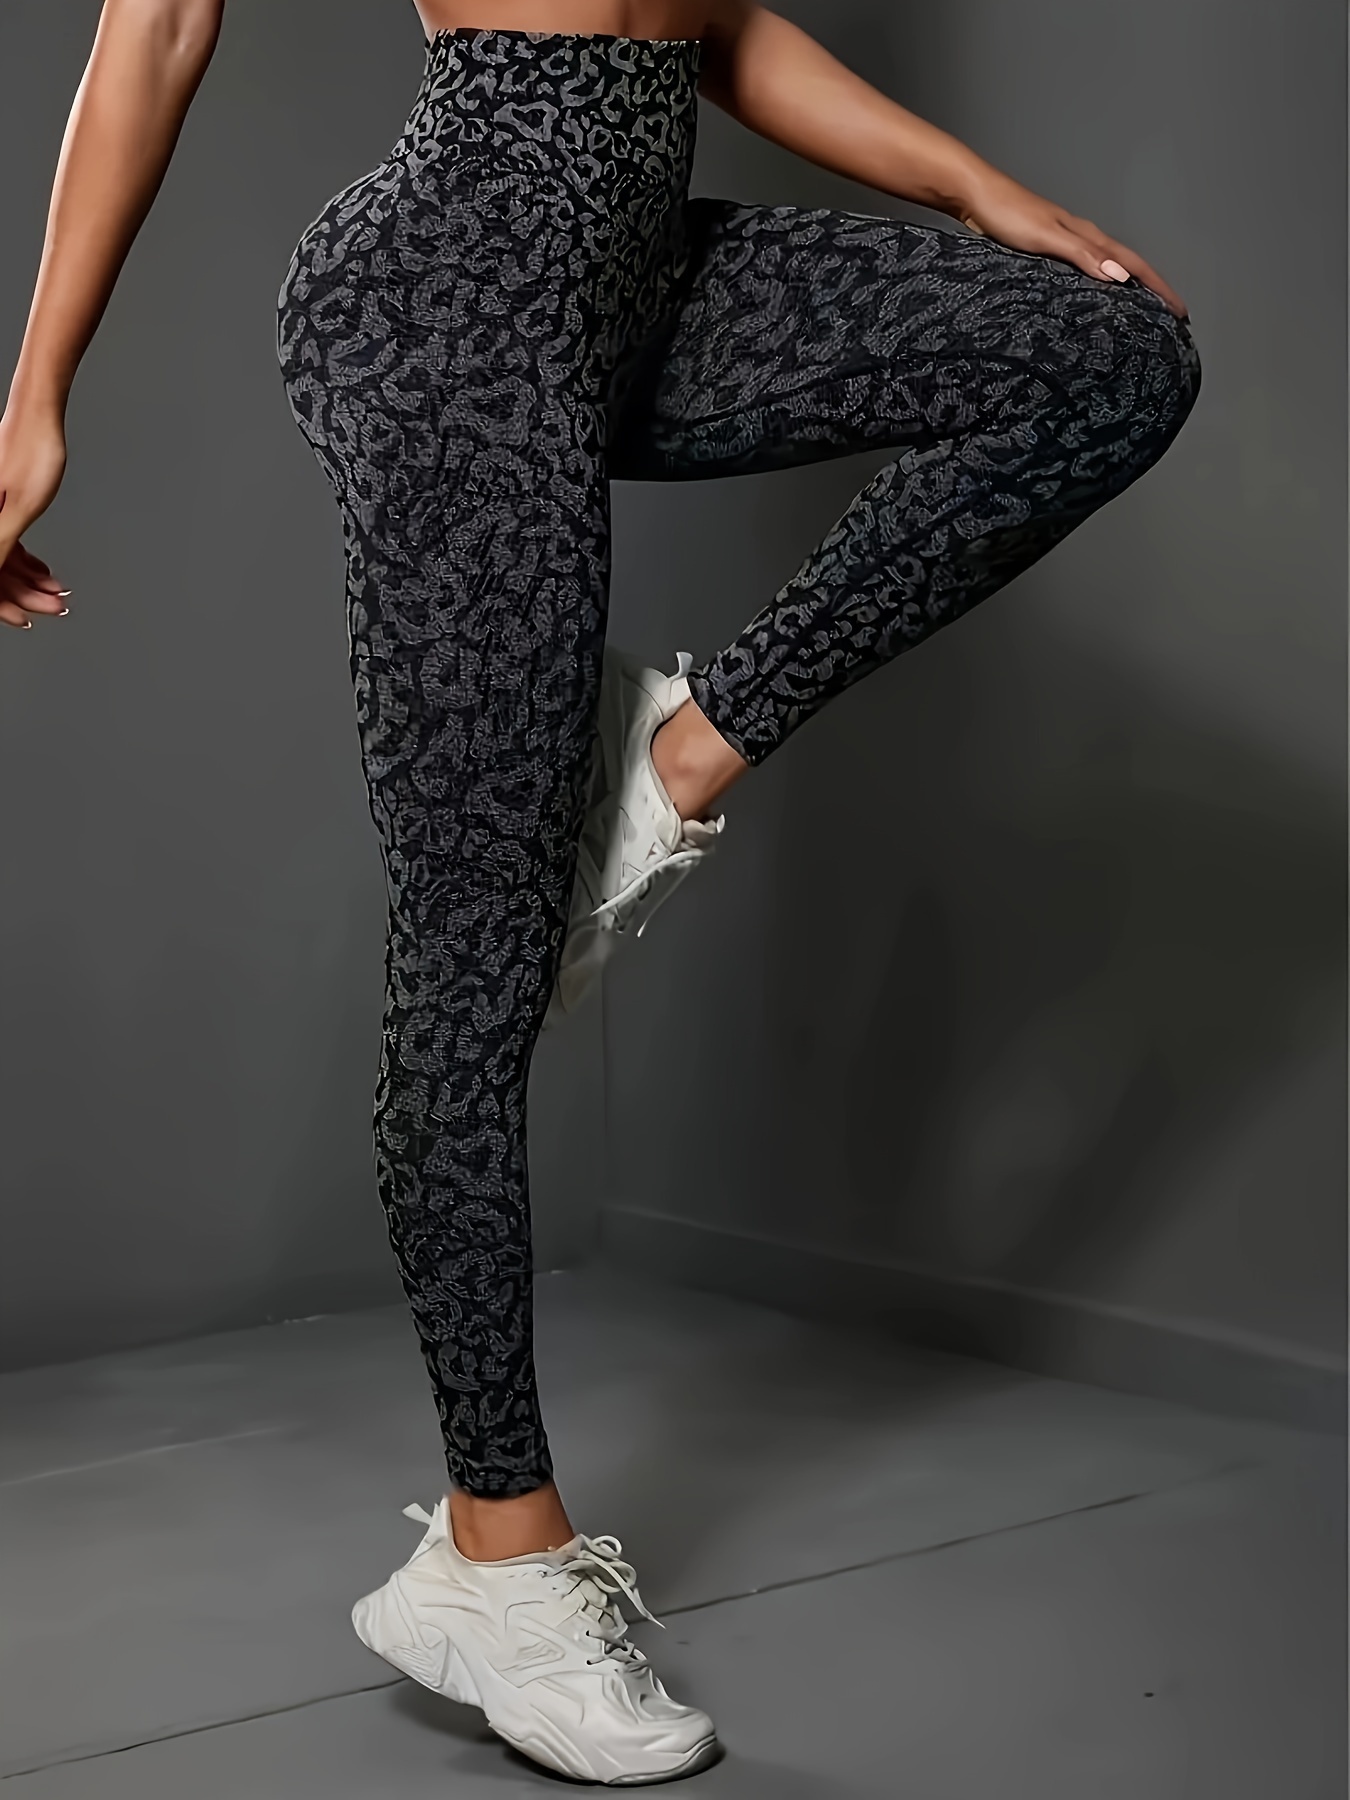 Brown Leopard Leggings with pockets - ClickEdge